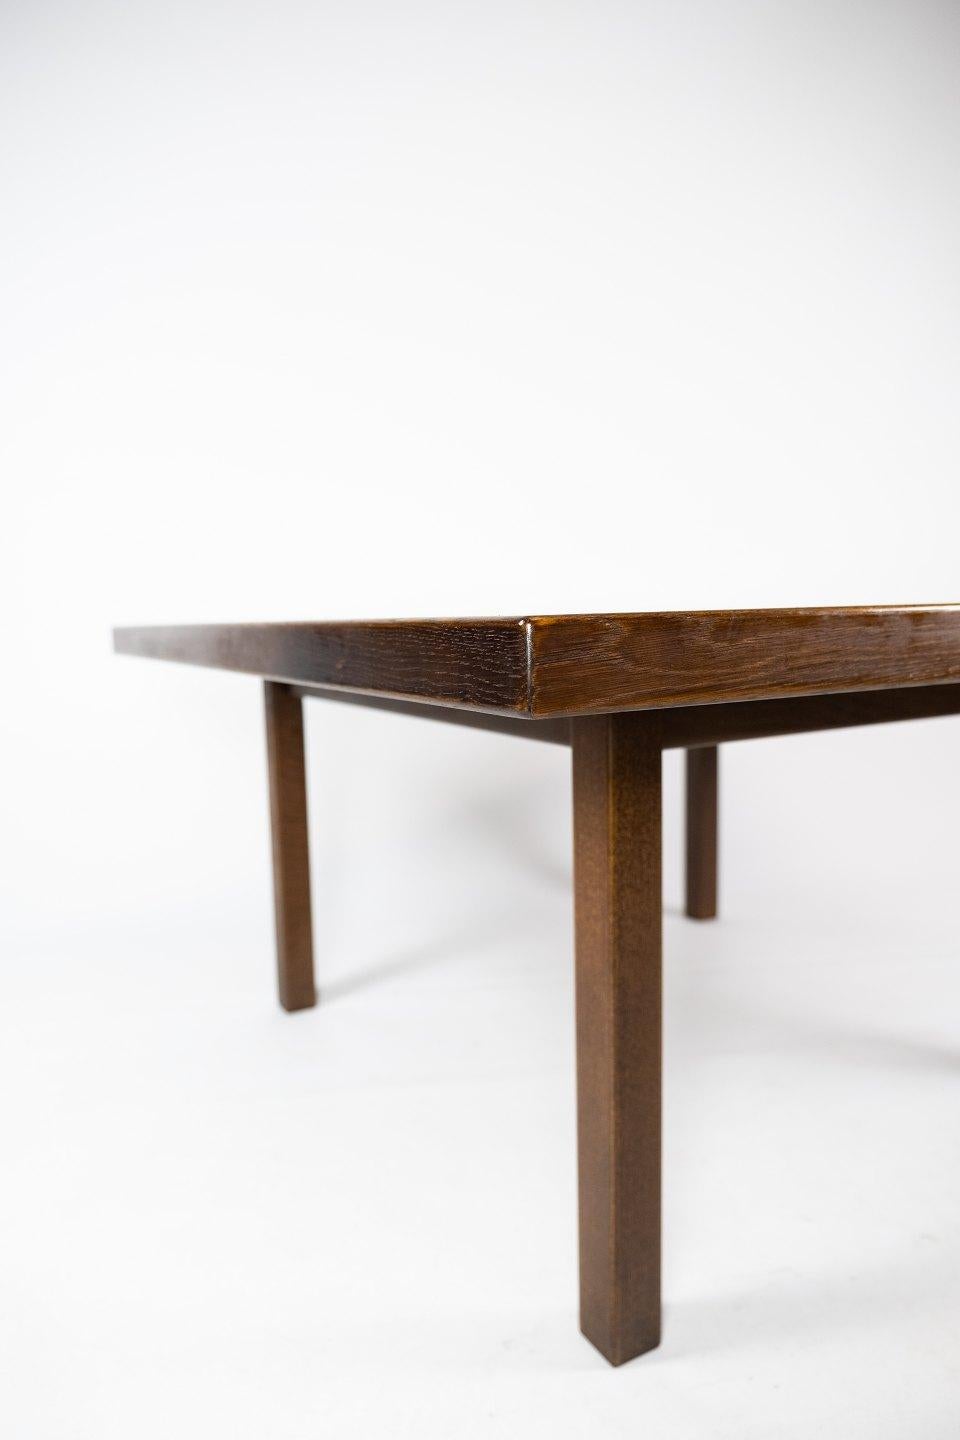 Mid-20th Century Coffee Table Made In Dark Oak, Danish Design From 1960s For Sale